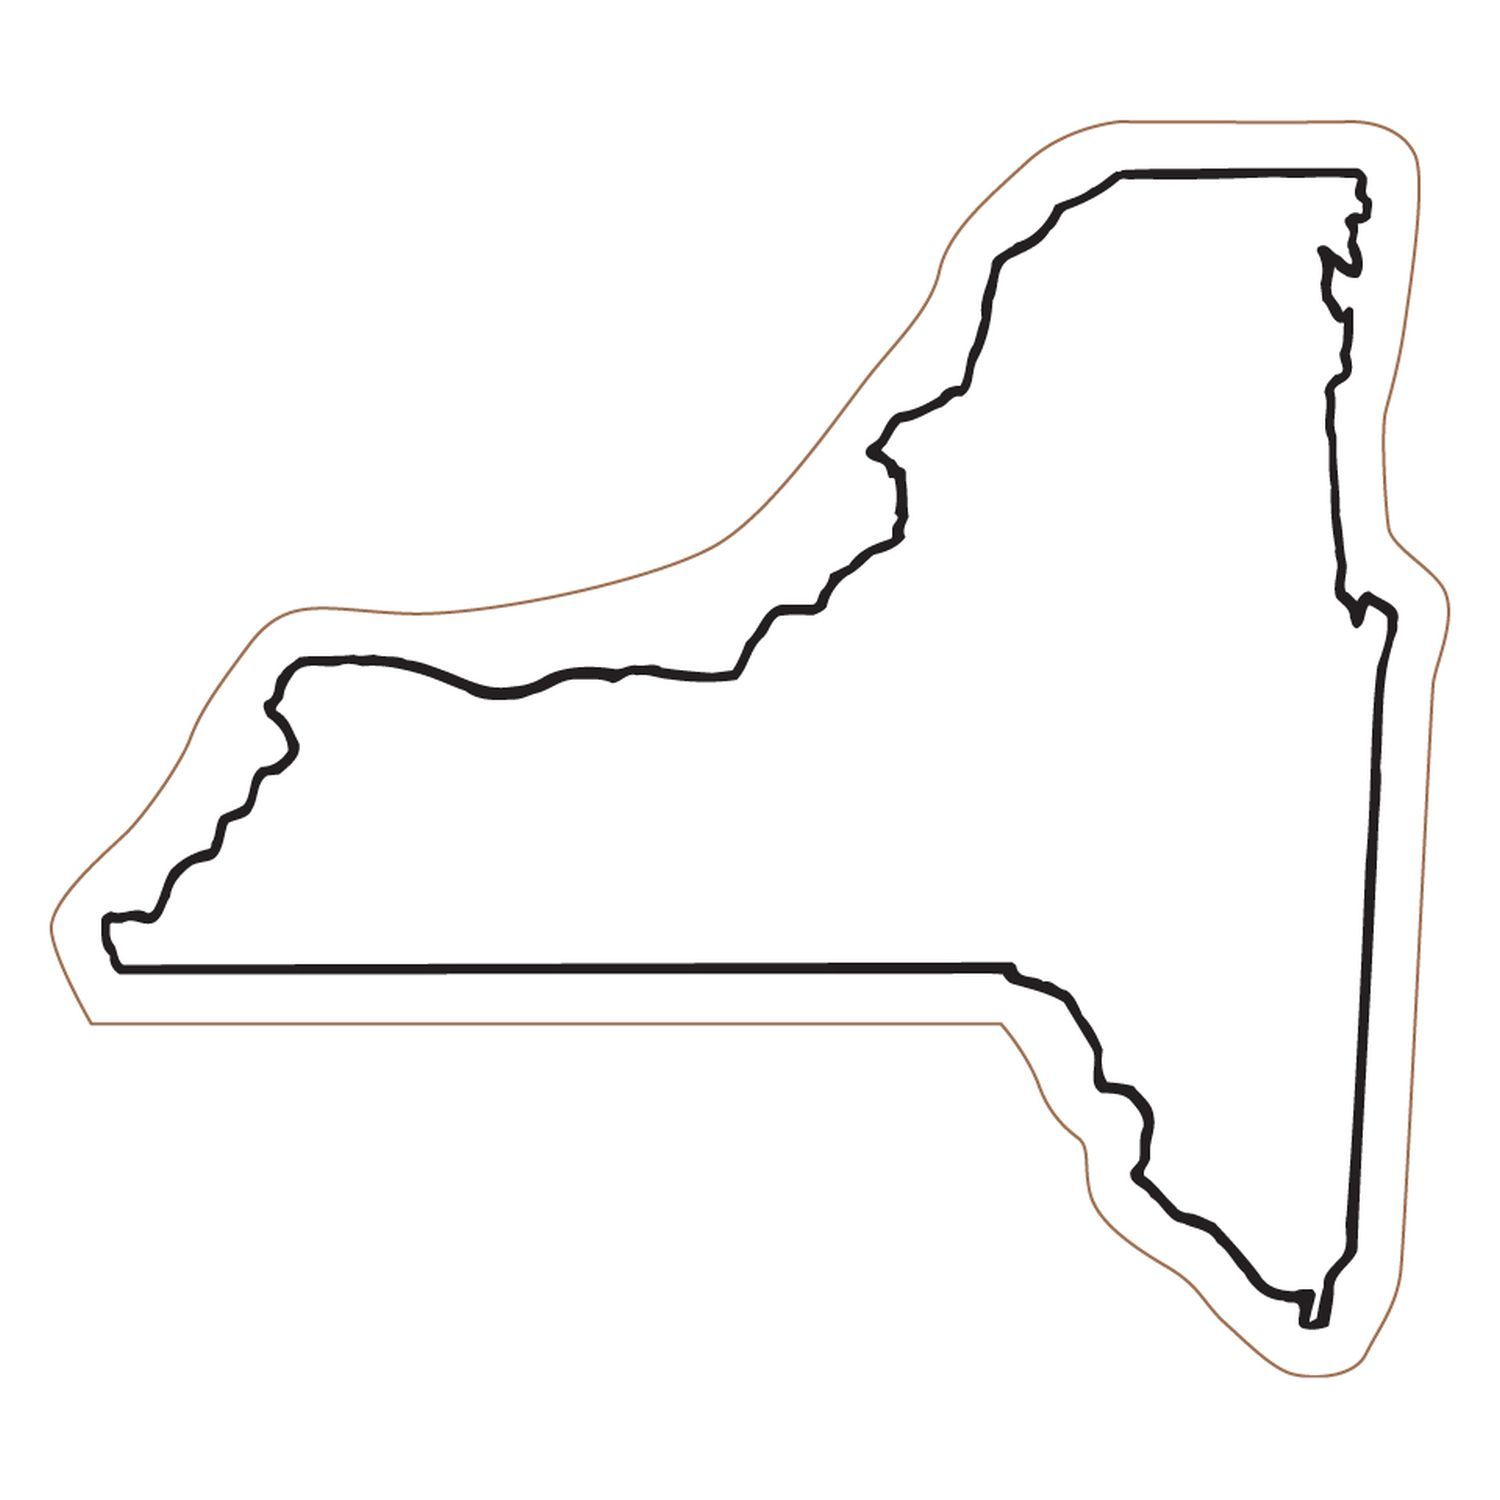 Best Photos of New York State Outline Shape - New York State ...